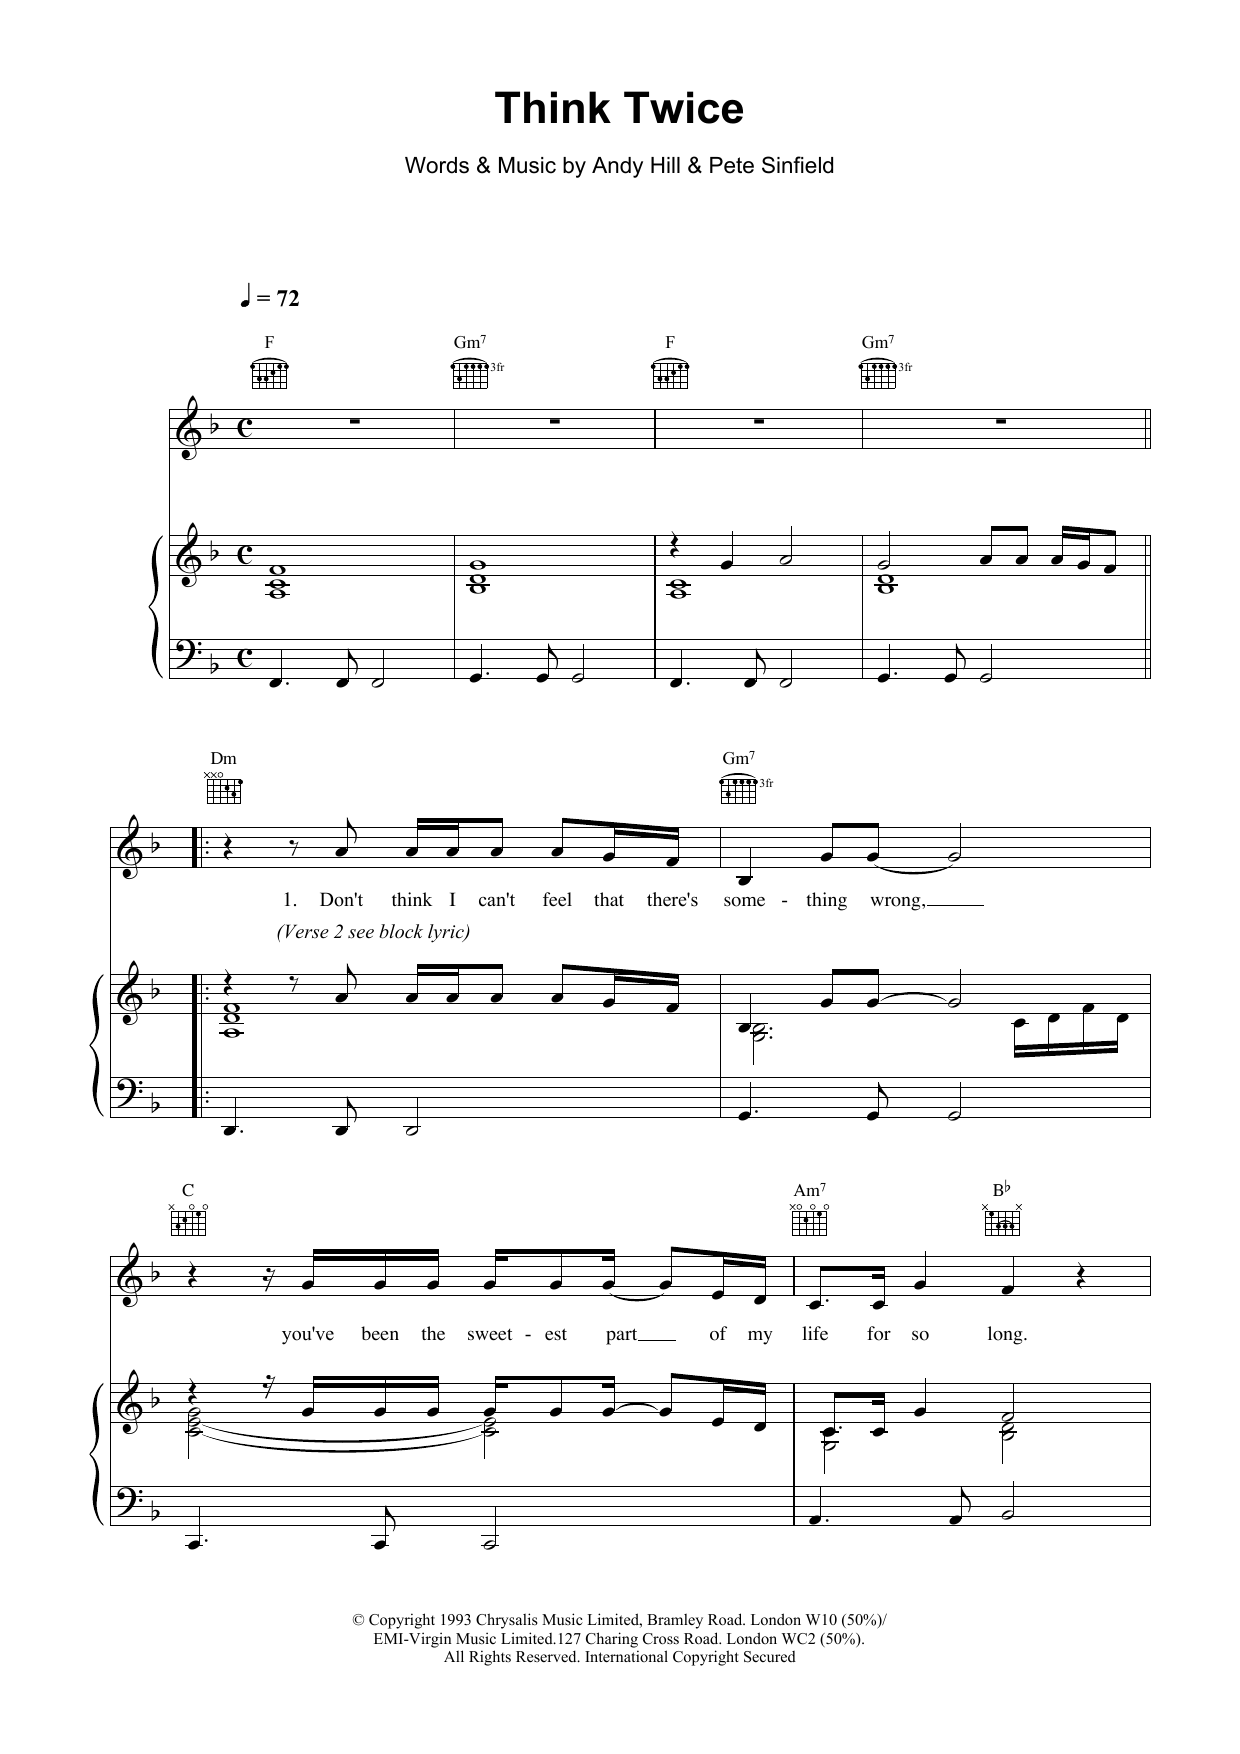 Celine Dion Think Twice sheet music notes and chords. Download Printable PDF.